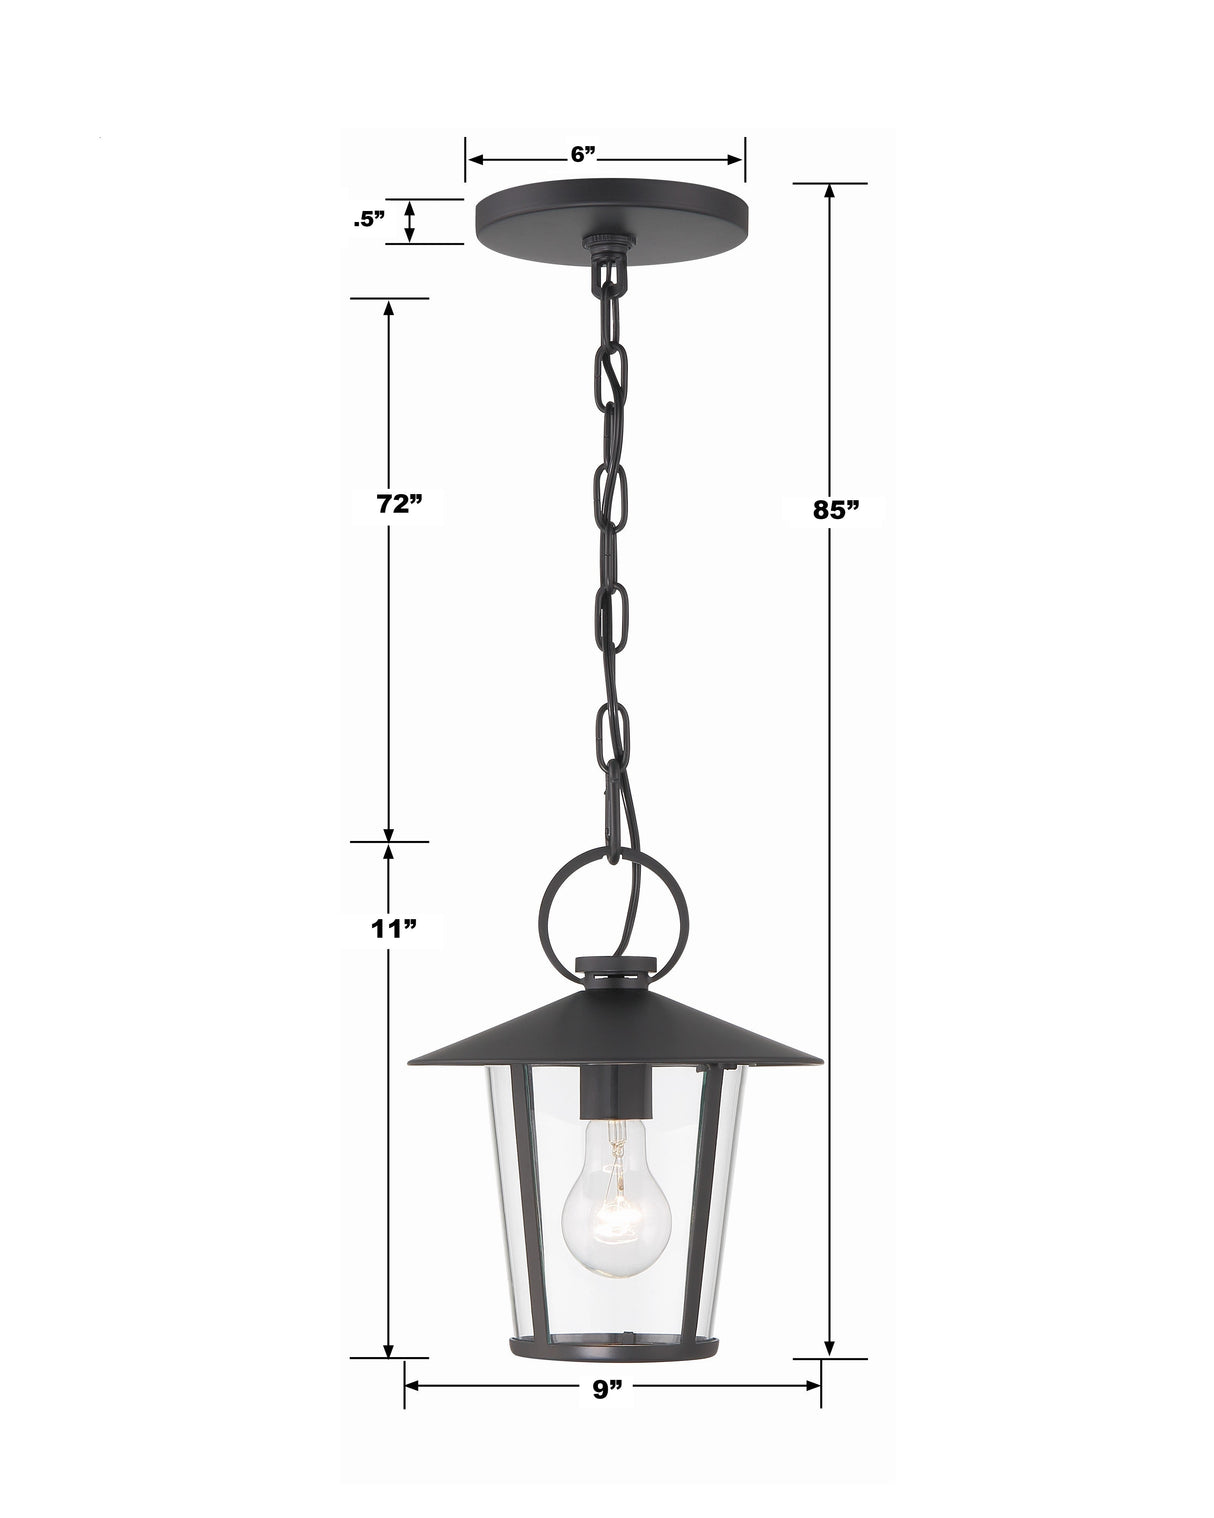 Andover 1 Light Matte Black Outdoor Pendant AND-9203-CL-MK